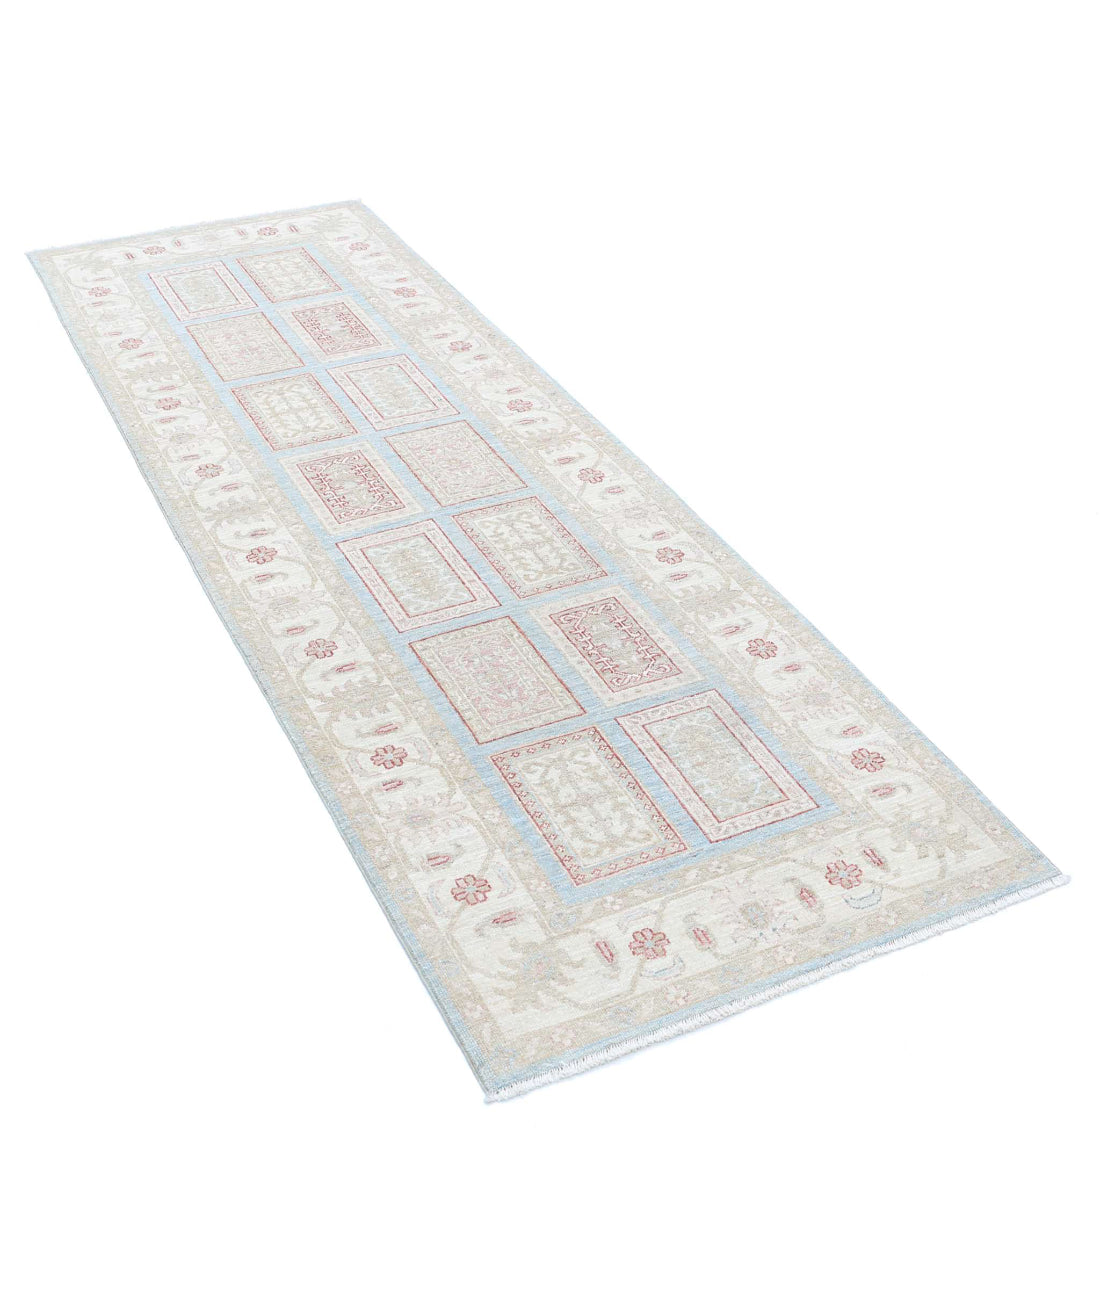 Hand Knotted Serenity Wool Rug - 2'9'' x 7'9'' 2'9'' x 7'9'' (83 X 233) / Blue / Ivory